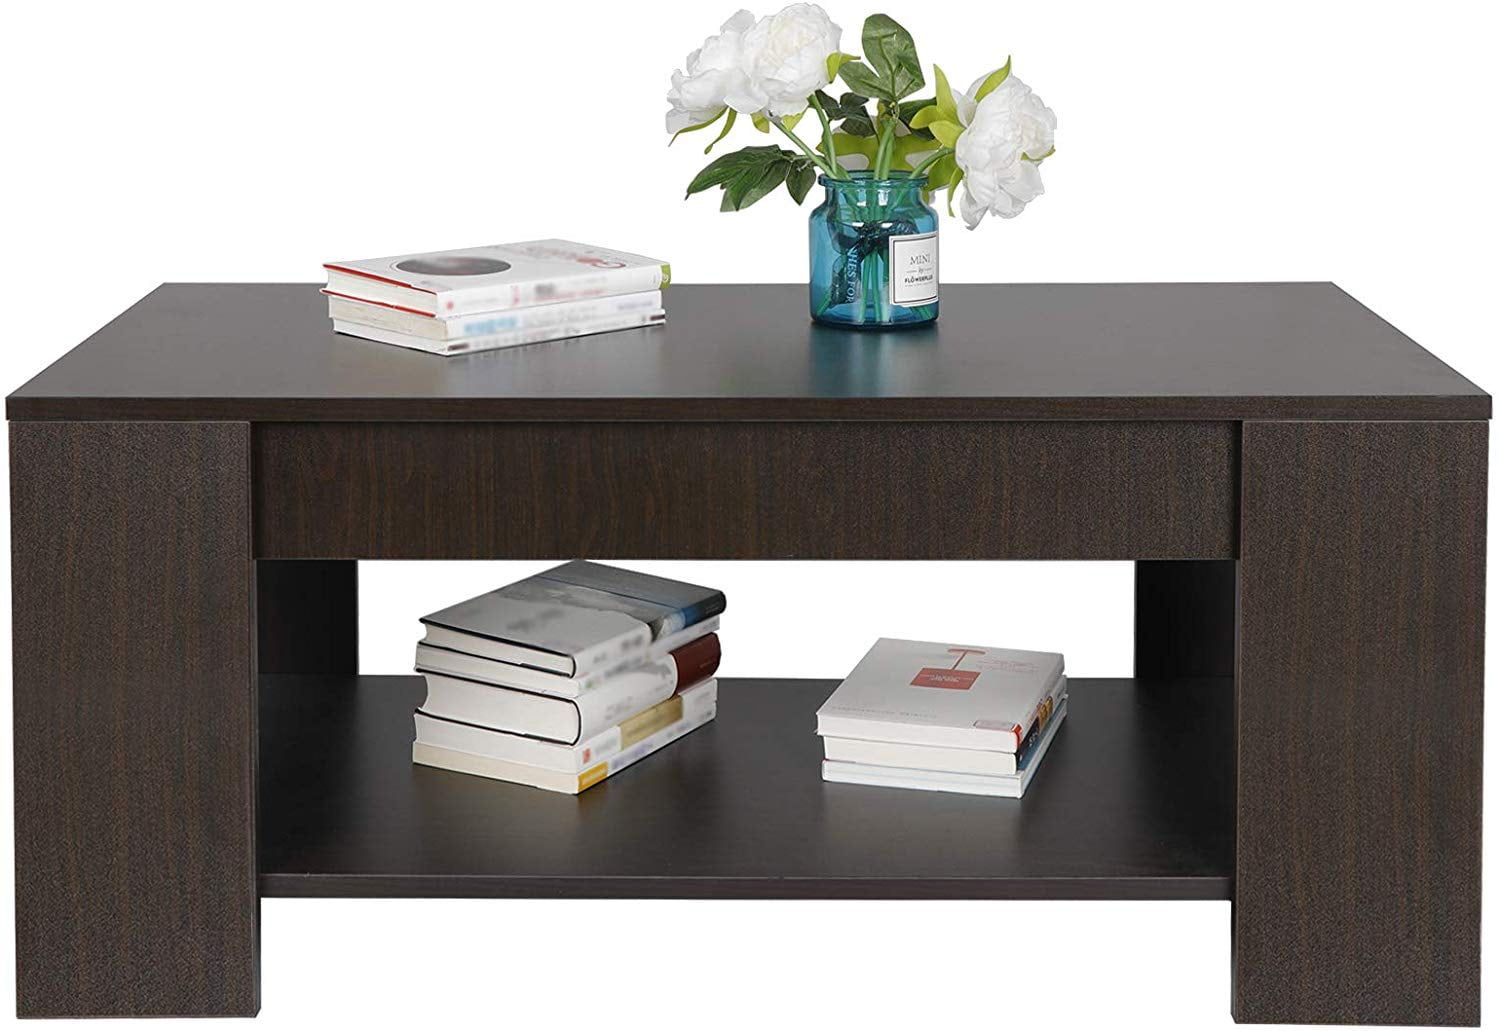 Zenstyle Lift Top Coffee Table Hidden Storage Cabinet Compartment Long In Lift Top Coffee Tables With Hidden Storage Compartments (View 13 of 15)